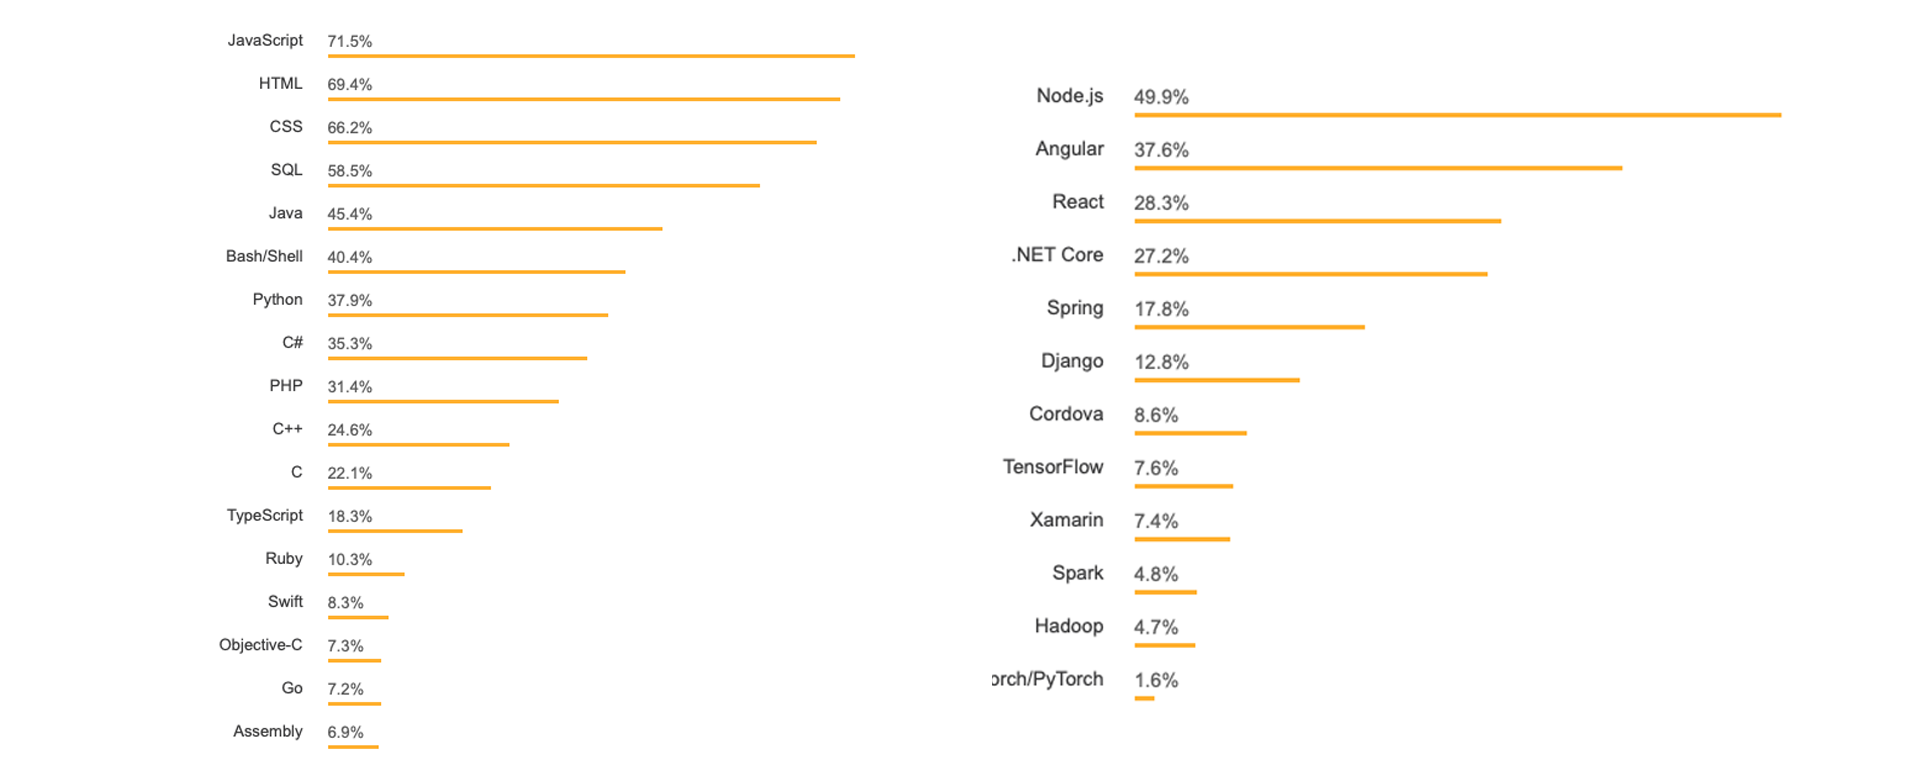 Most popular technologies, frameworks, libraries, and tools according to Stack Overflow